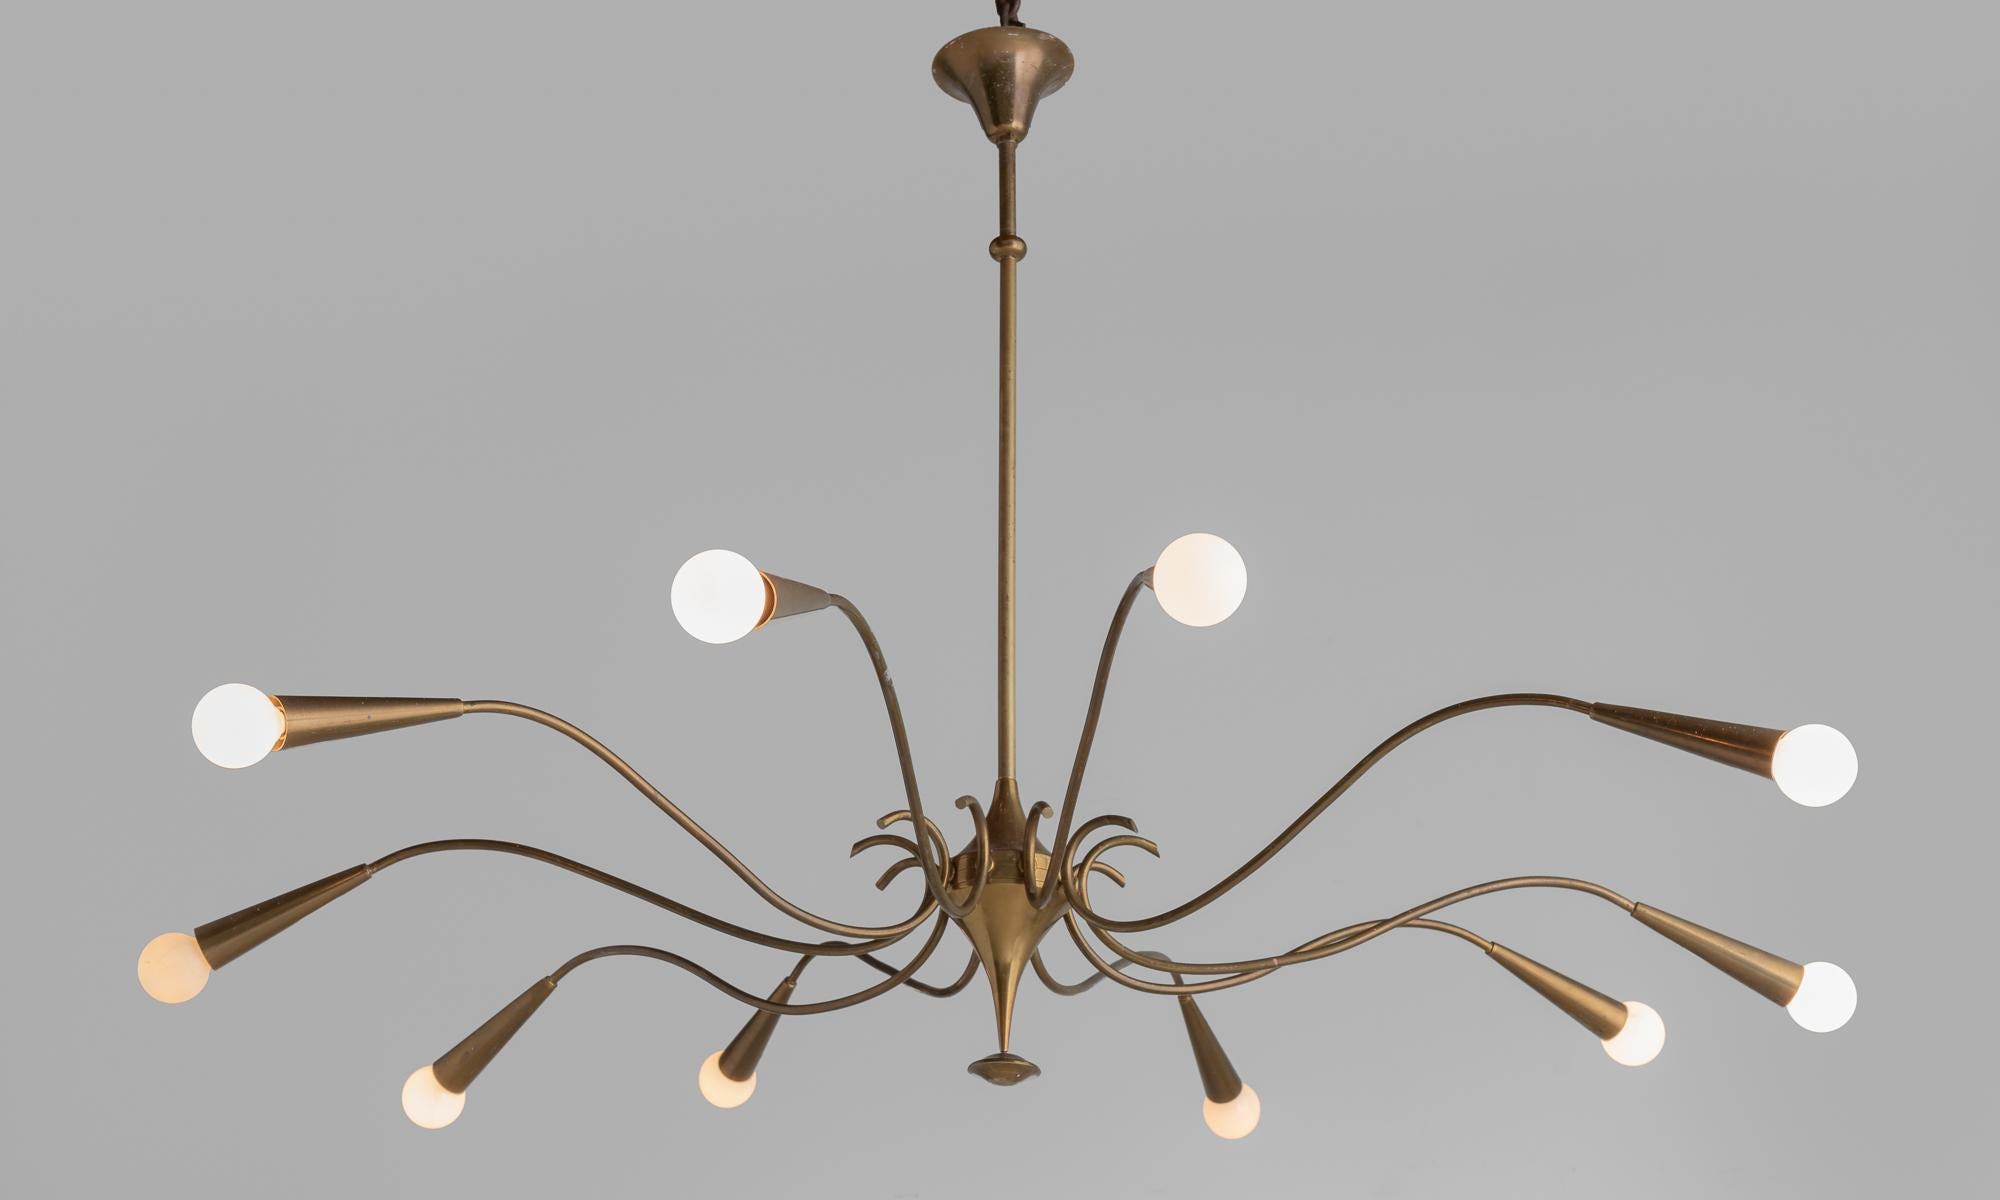 10-Arm Italian brass chandelier, Italy, circa 1960.

All brass chandelier with 10 curved arms. Original condition.

Measures: 48